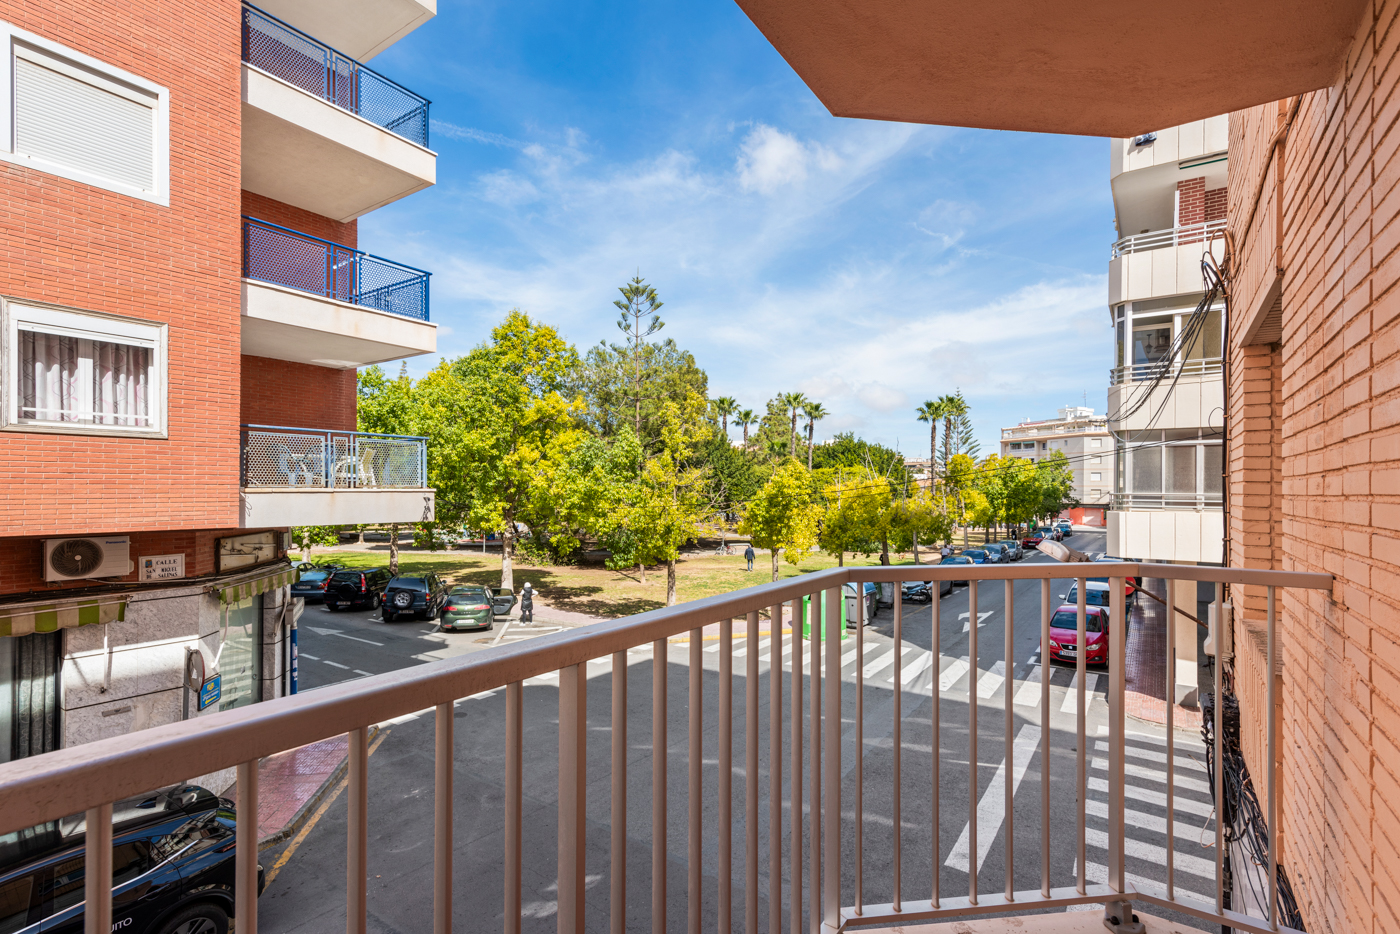 Property Image 615215-torrevieja-apartment-4-1